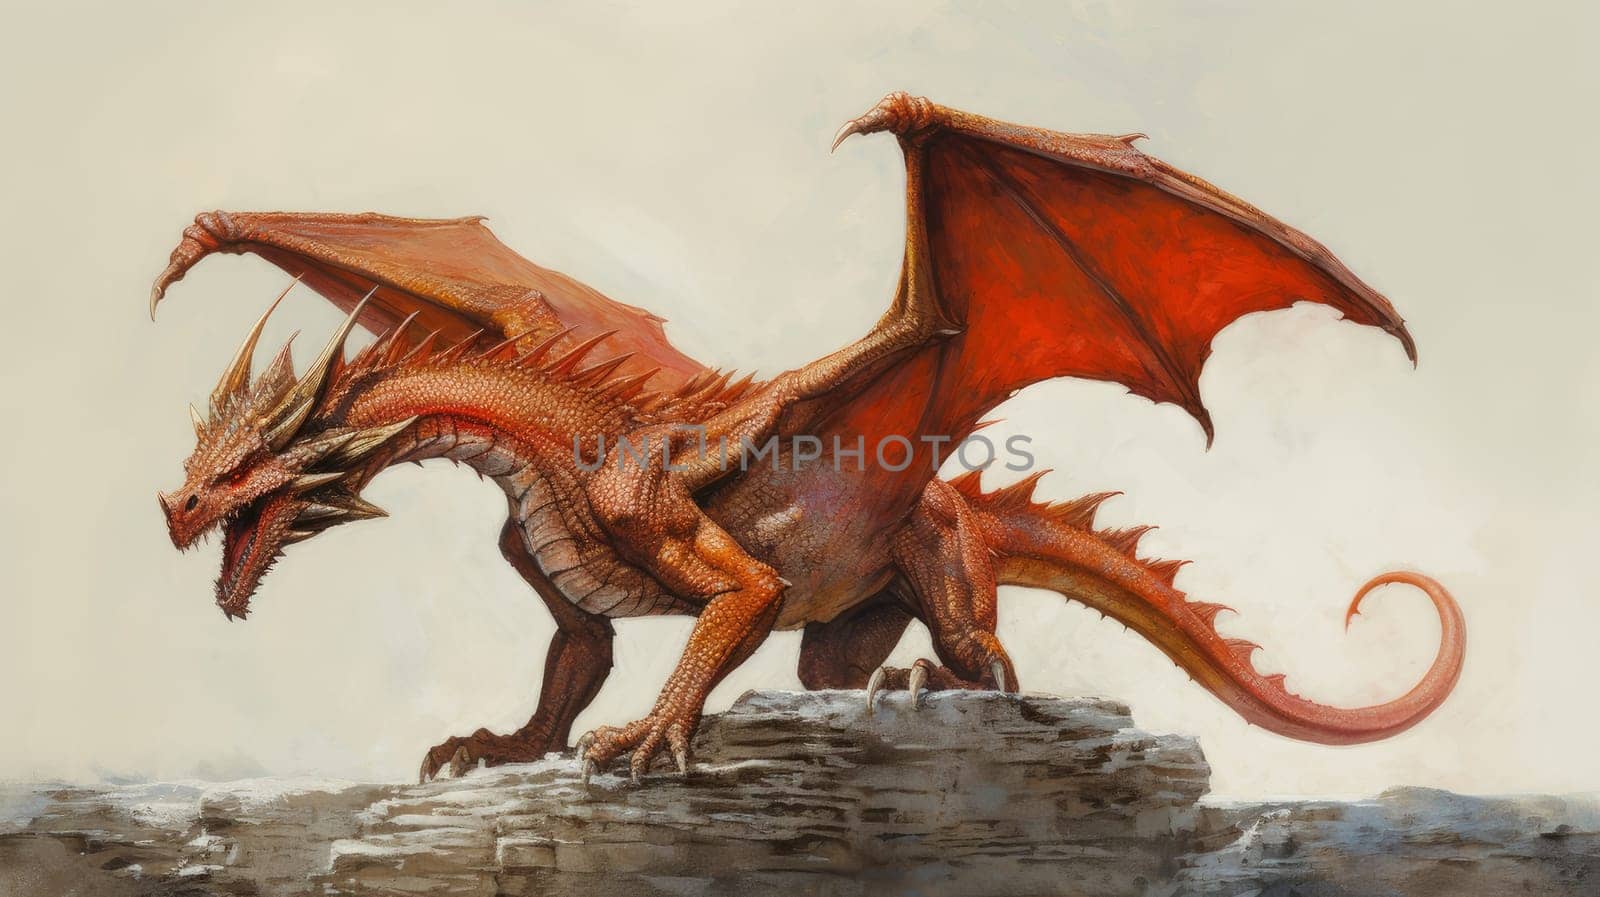 Large, the dragon is a symbol of the new year according to the eastern calendar. AI generated